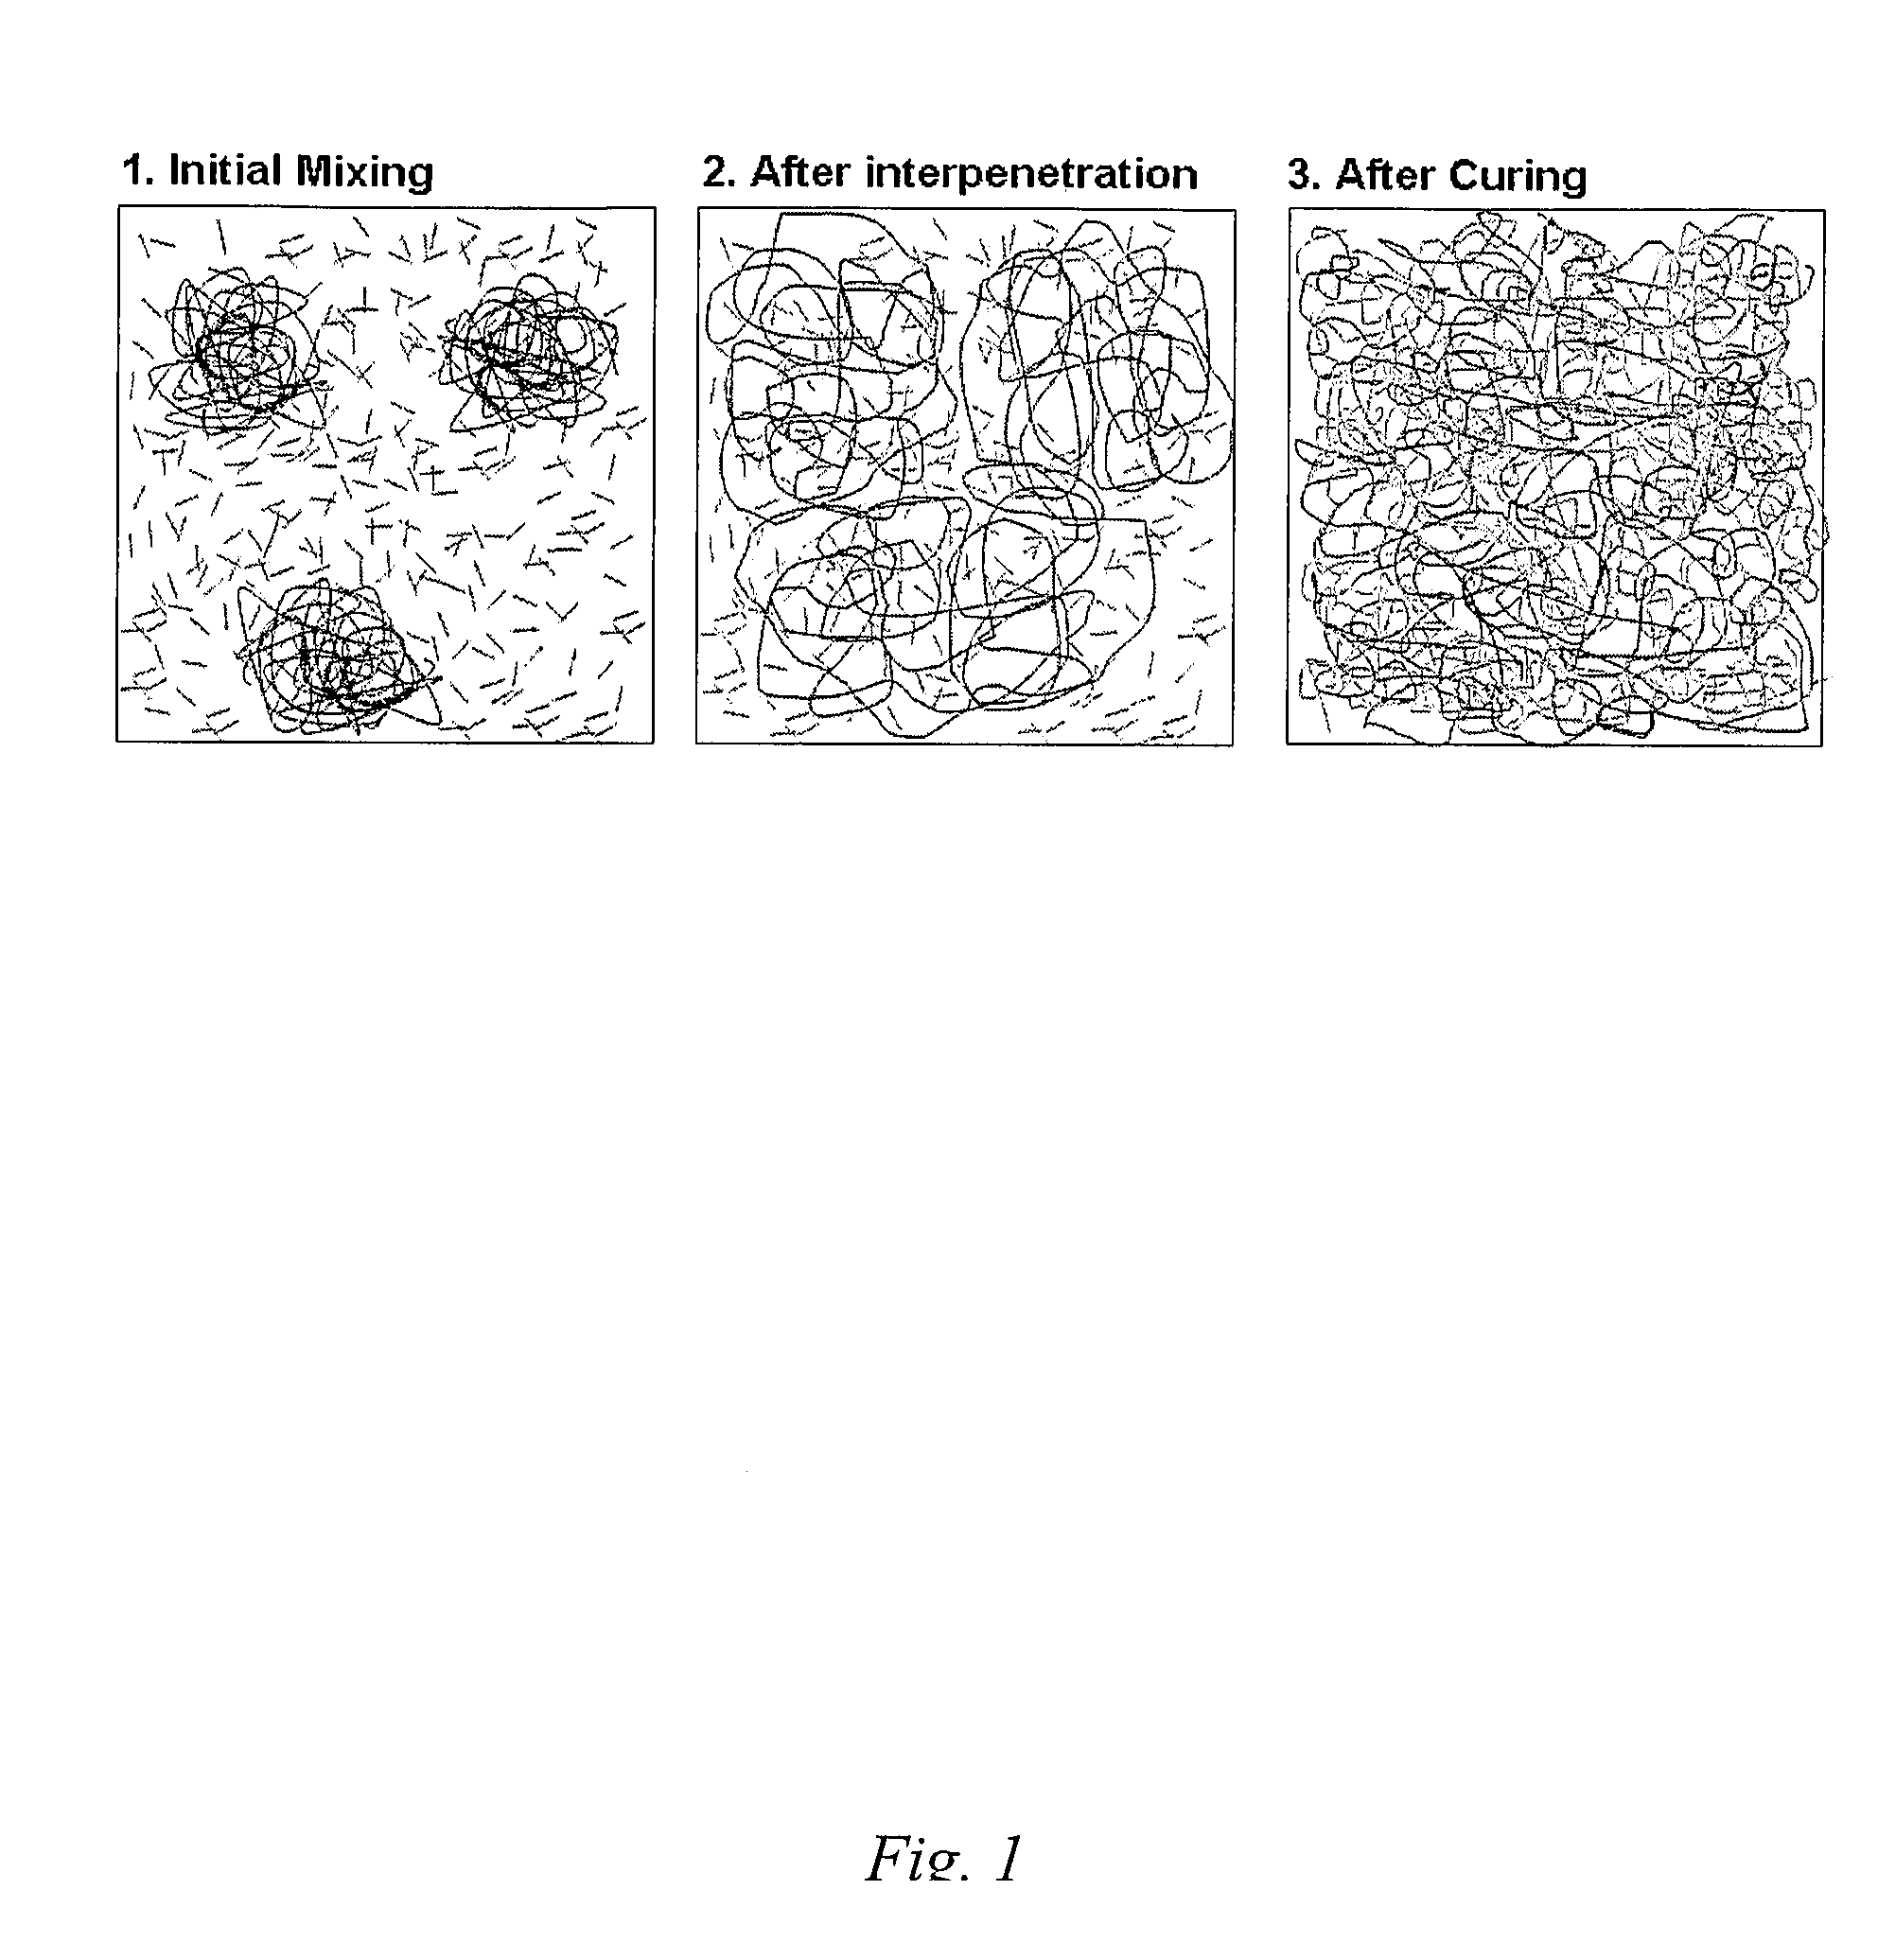 Polymer / Carbon-Nanotube Interpenetrating Networks and Process for Making Same